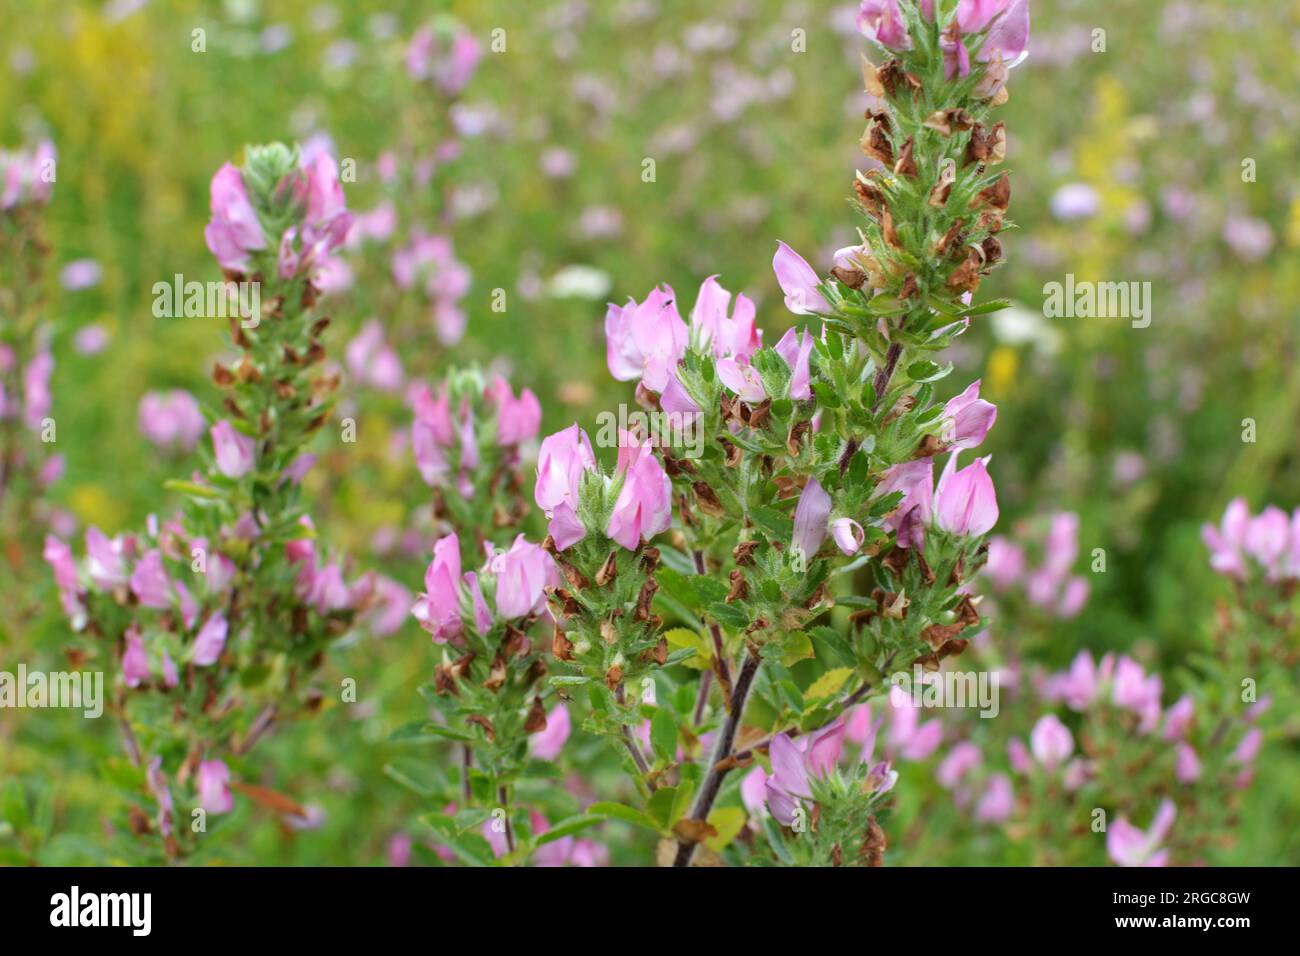 Ononis spinosa grows among grasses in the wild Stock Photo